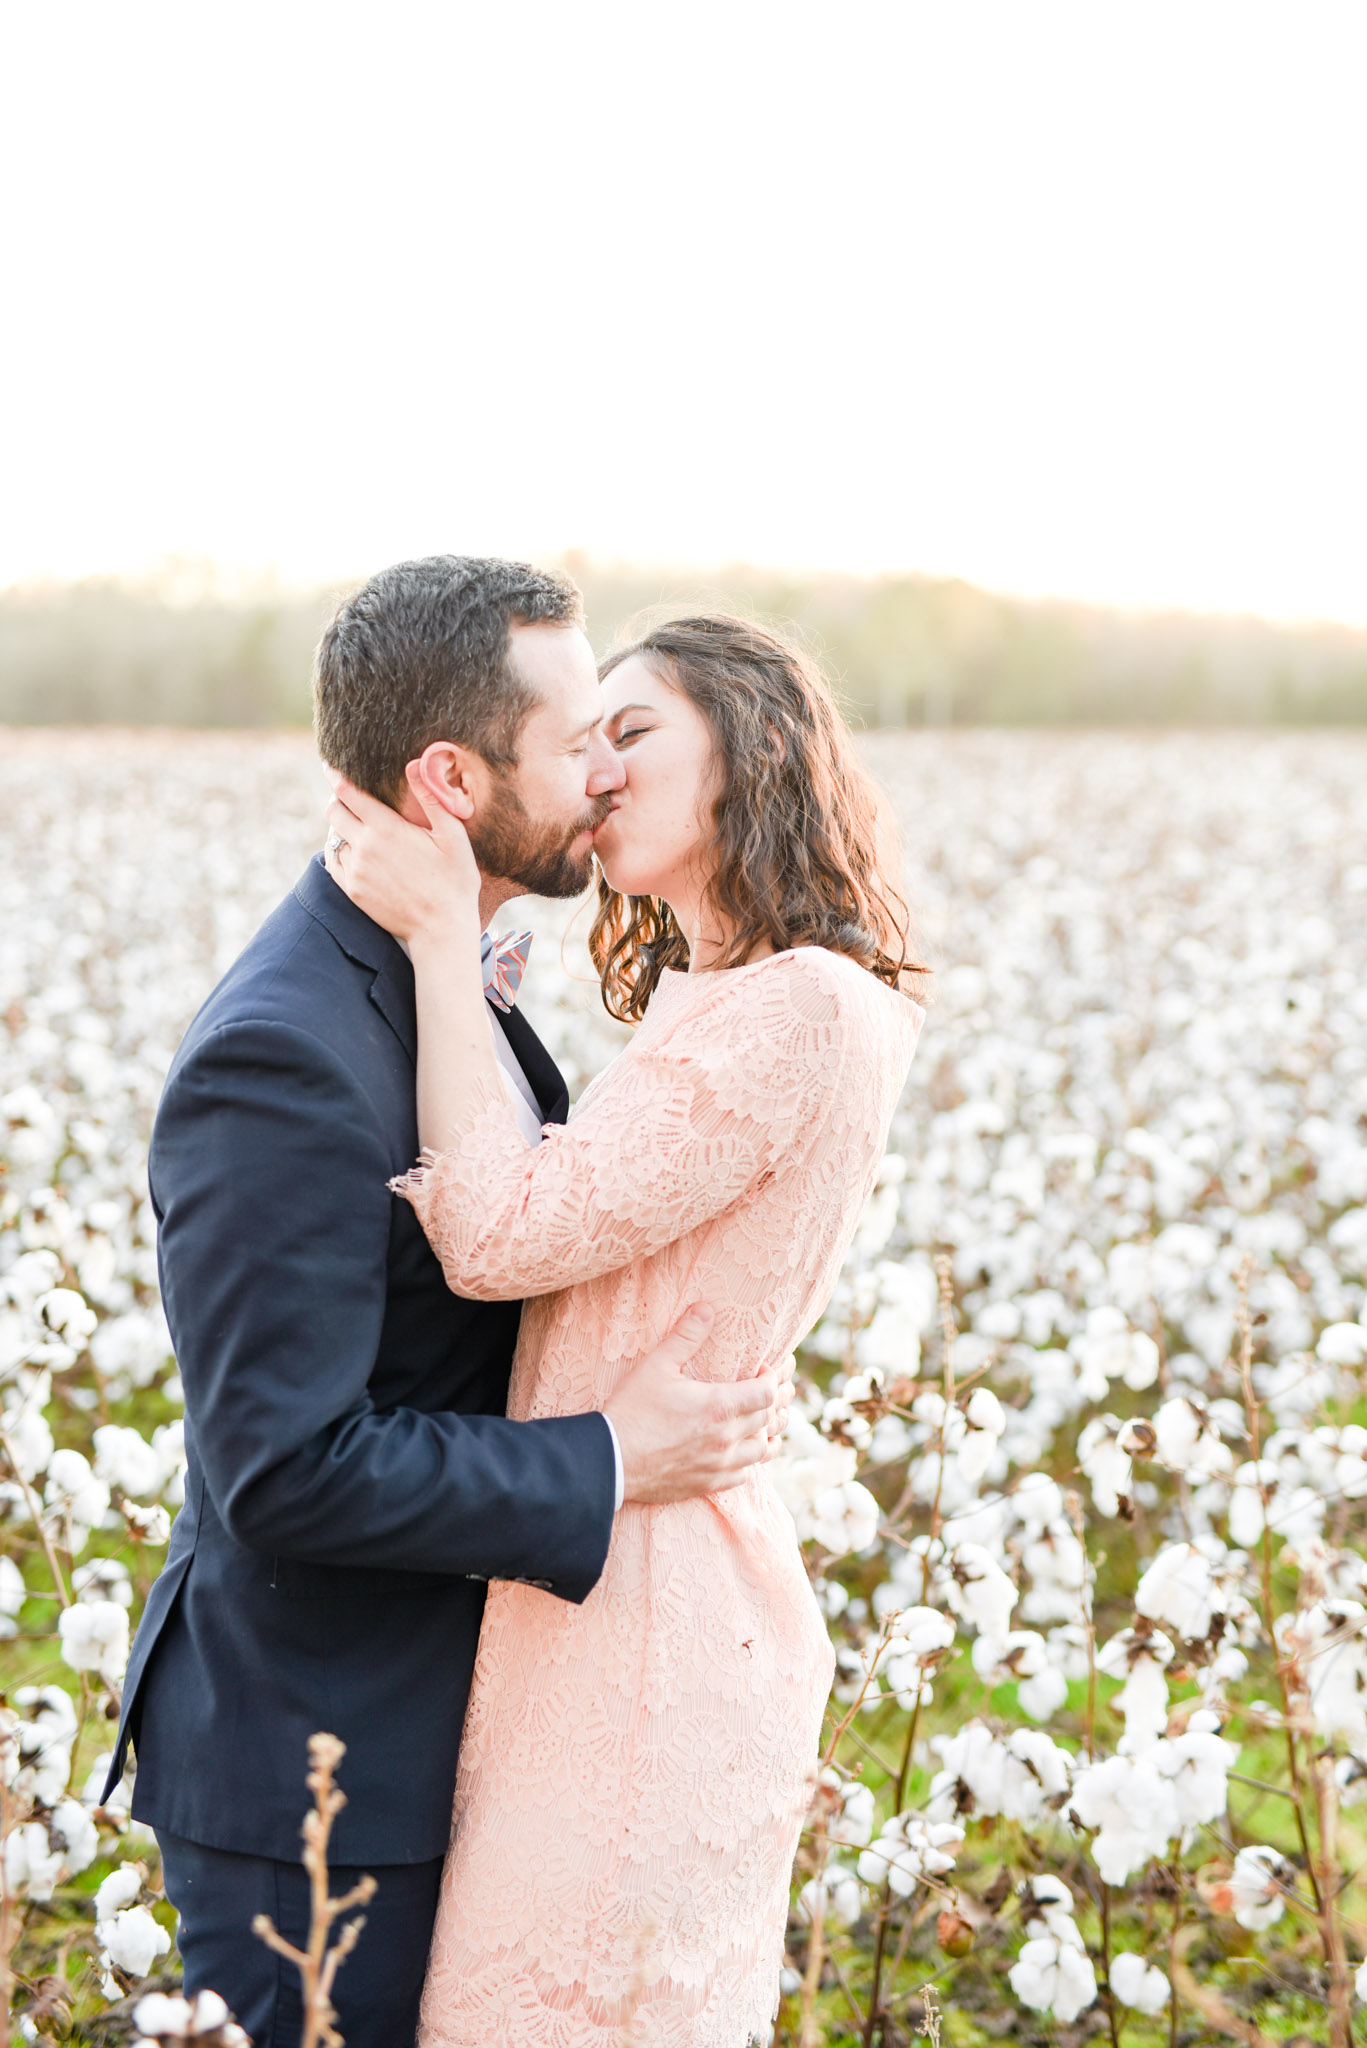 Couple kisses at sunset in cotton field.